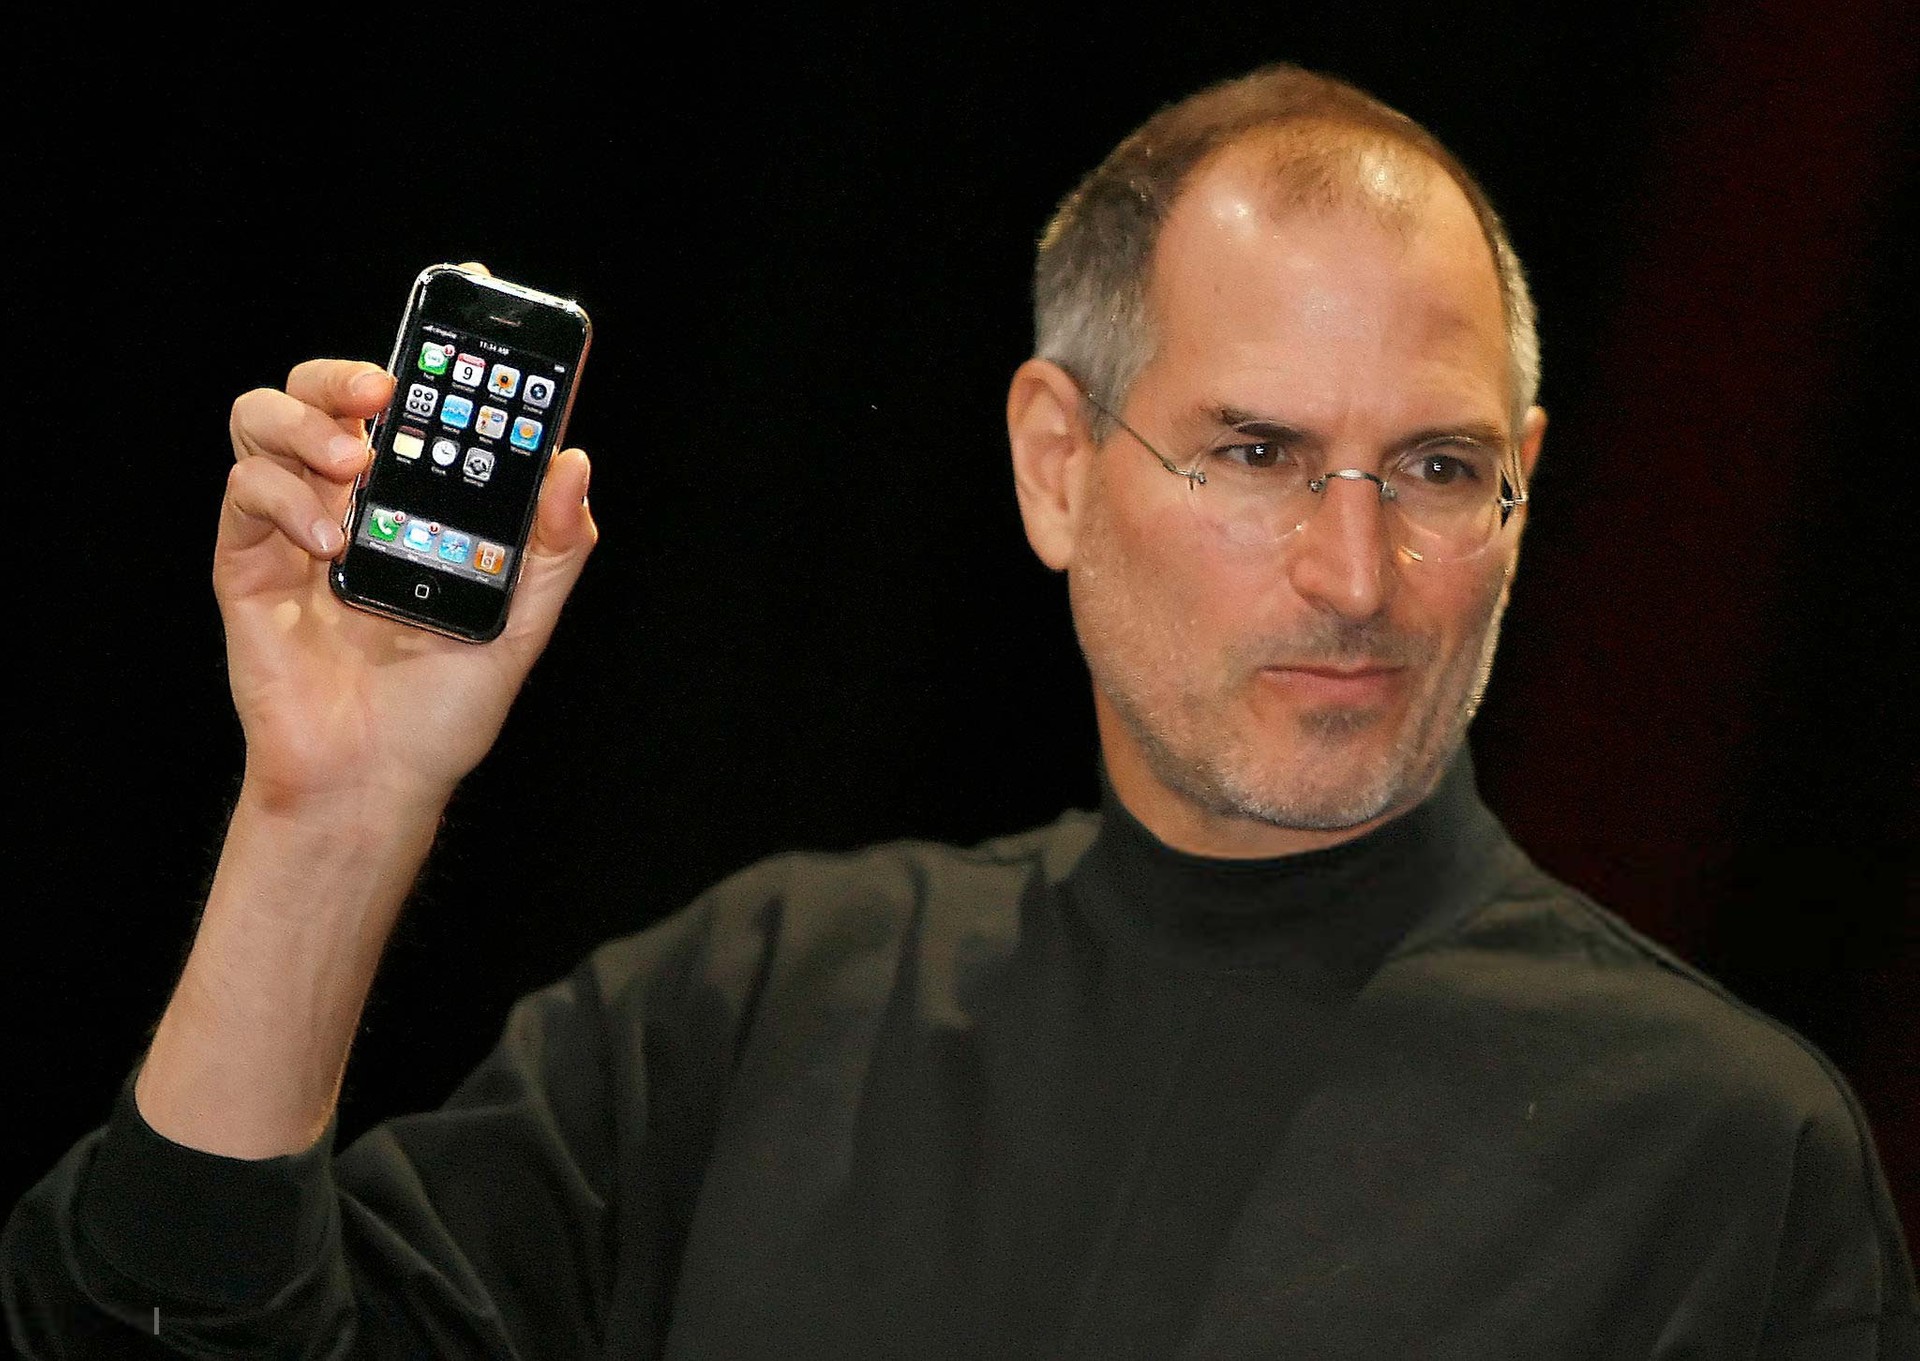 Remember living: Steve Jobs showed off the first iPhone 15 years ago